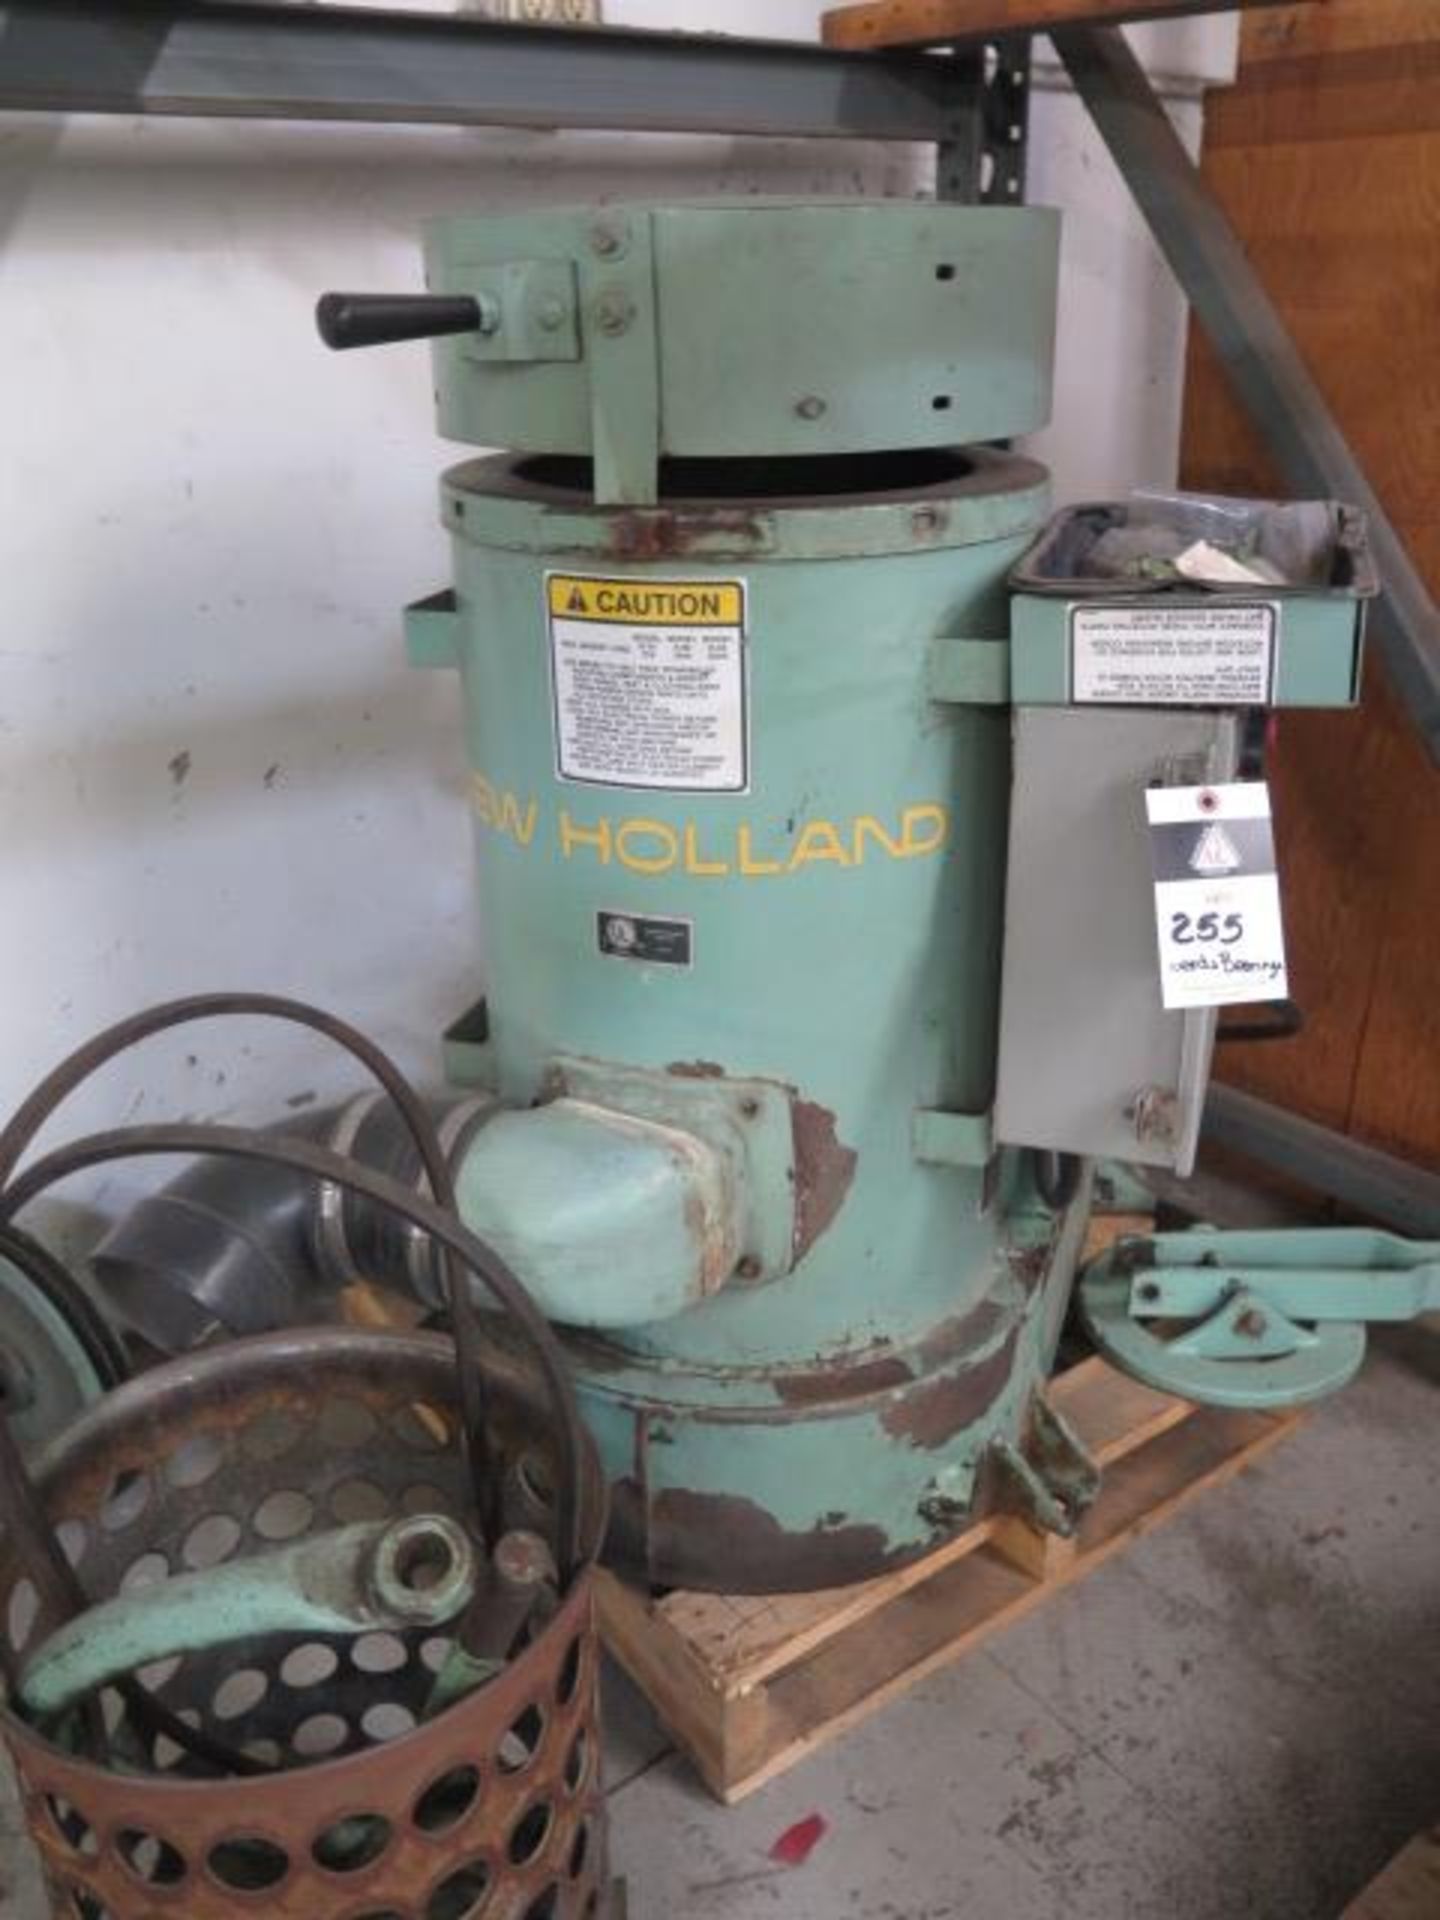 New Holland mdl. K24 Heated Cip Spinner (NEEDS BEARINGS) (SOLD AS-IS - NO WARRANTY) - Image 3 of 4